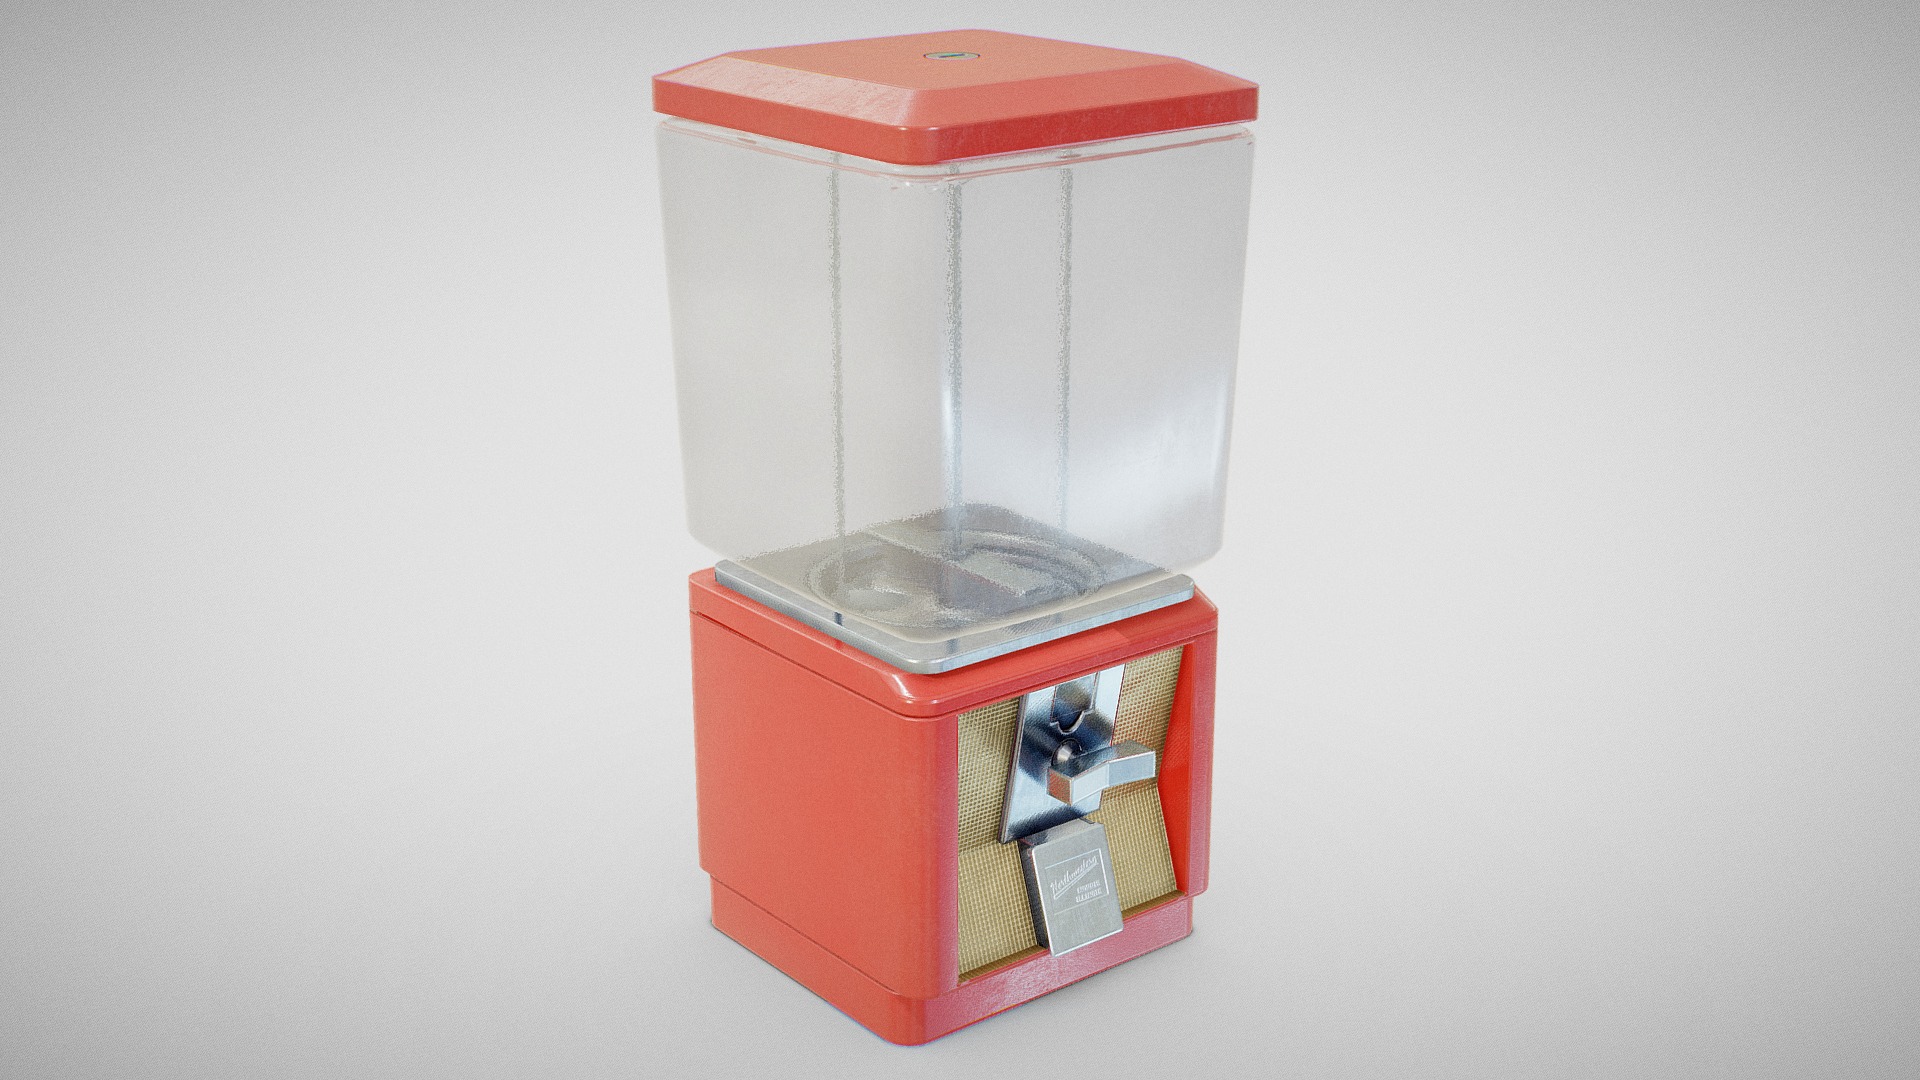 3D model Candy Machine – Model 60 (Clean) - This is a 3D model of the Candy Machine - Model 60 (Clean). The 3D model is about a red and white box with a clear top and a clear top.